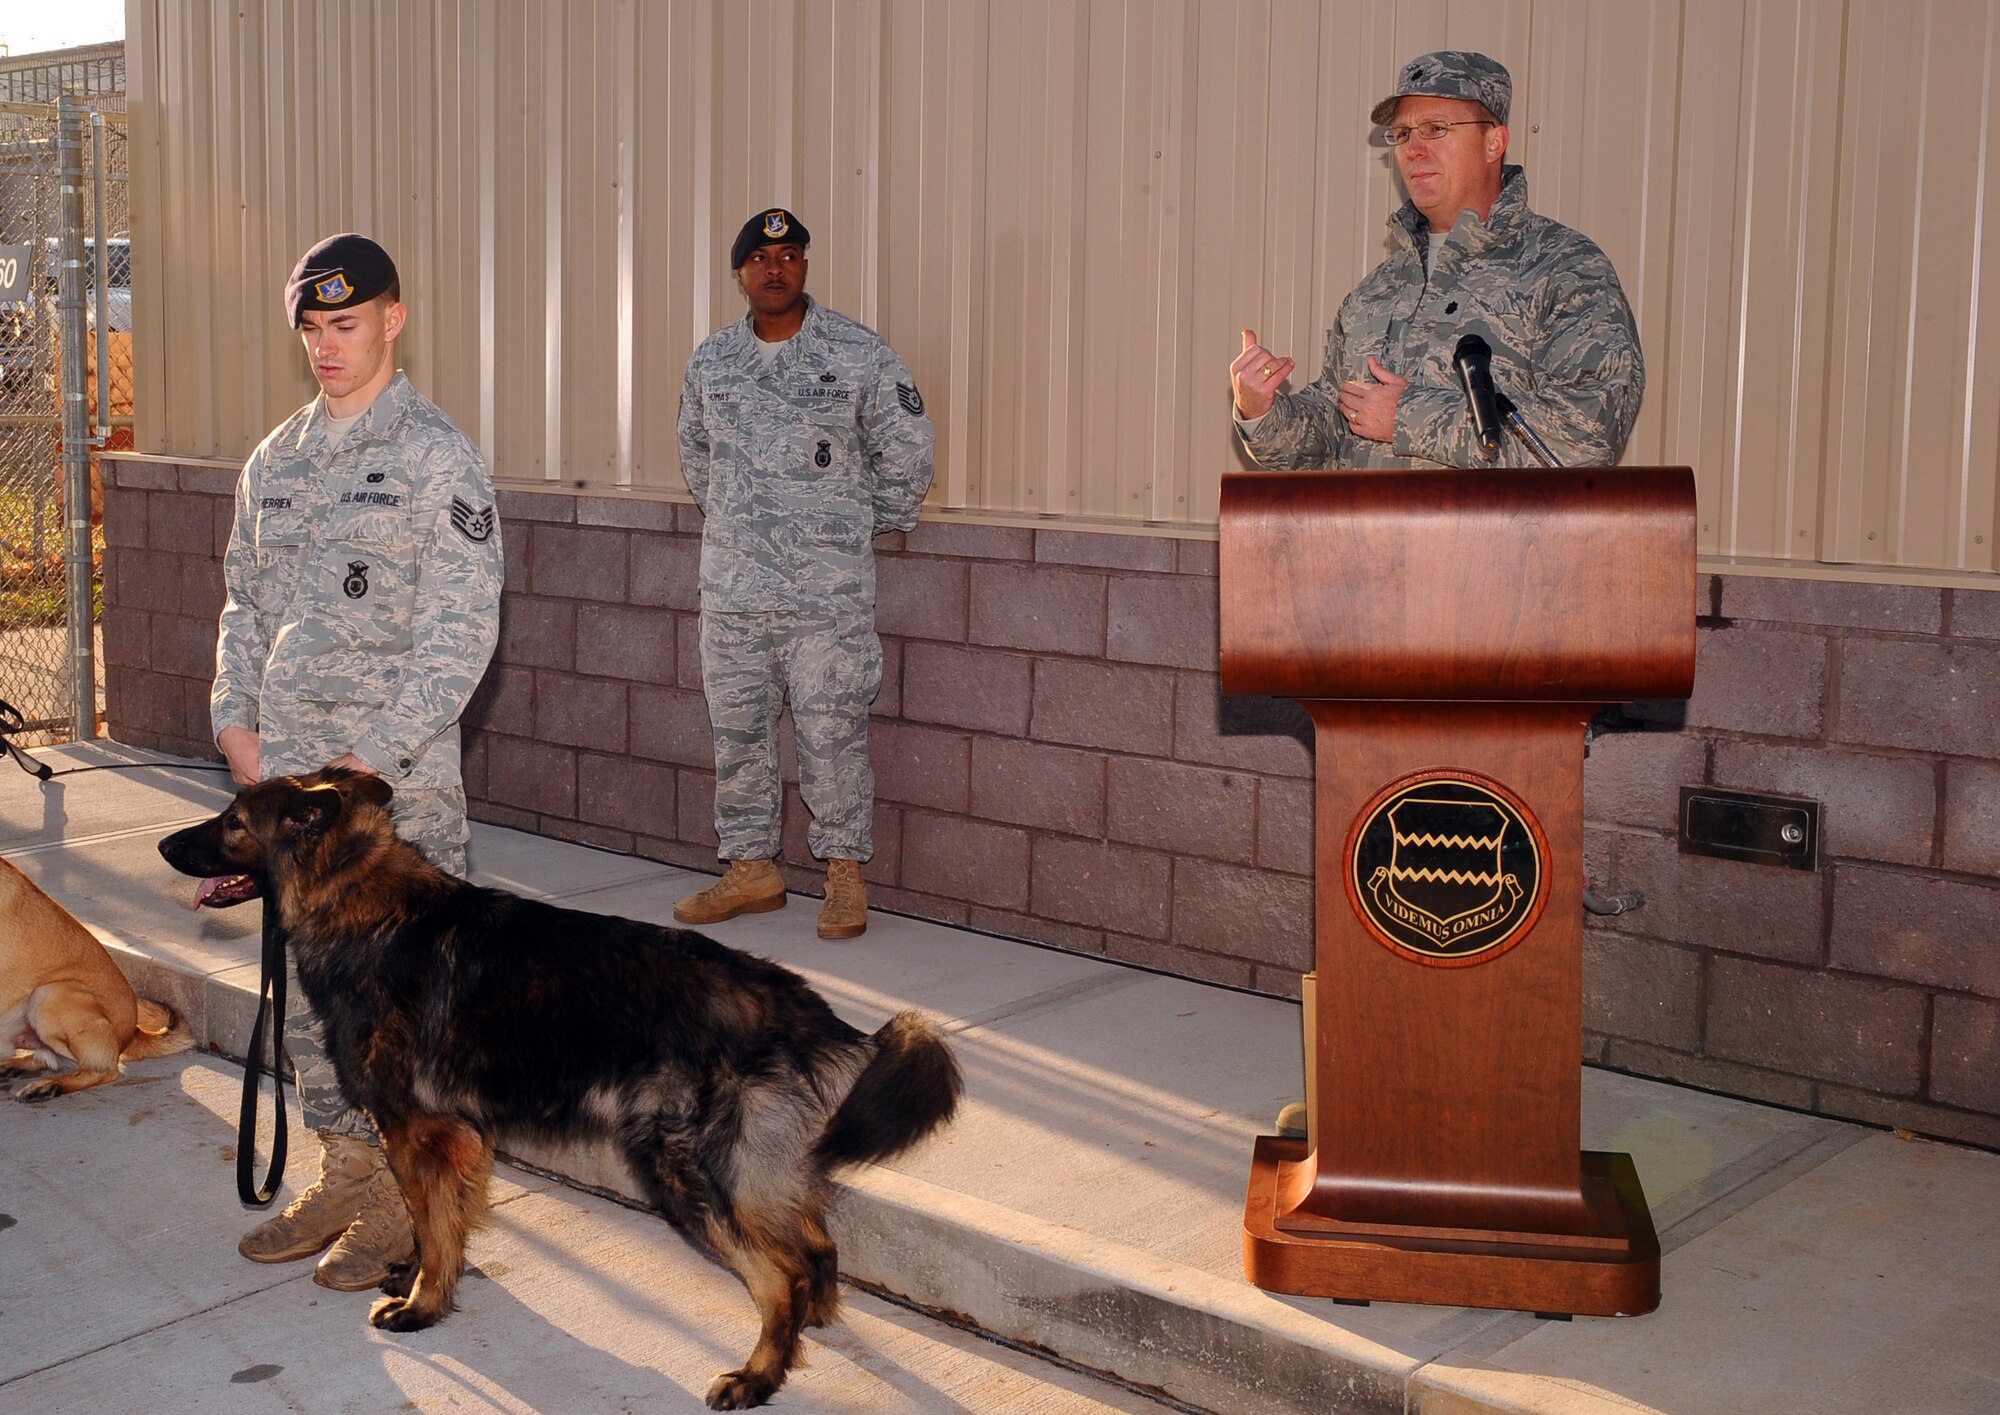 OFFUTT AIR FORCE BASE, Neb. ? Lt. Col. Mitchell Maddox, 55th Mission Support Group deputy commander, gives opening remarks in front of the extensively remodeled K-9 kennel prior to the formal ribbon cutting and tour, Nov. 18.  The $1.3 million renovation project comes well equipped giving the dogs a 10 foot by 14 foot space with private dog house, heated floors, separate isolation kennels for sick dogs and other medical treatment among many other modern amenities.  The 55th Security Forces K-9 section is responsible for searching over 3,000 vehicles a year, securing 54,000 people, protecting and $9 billion in assets.
U.S. Air Force photo by Josh Plueger
